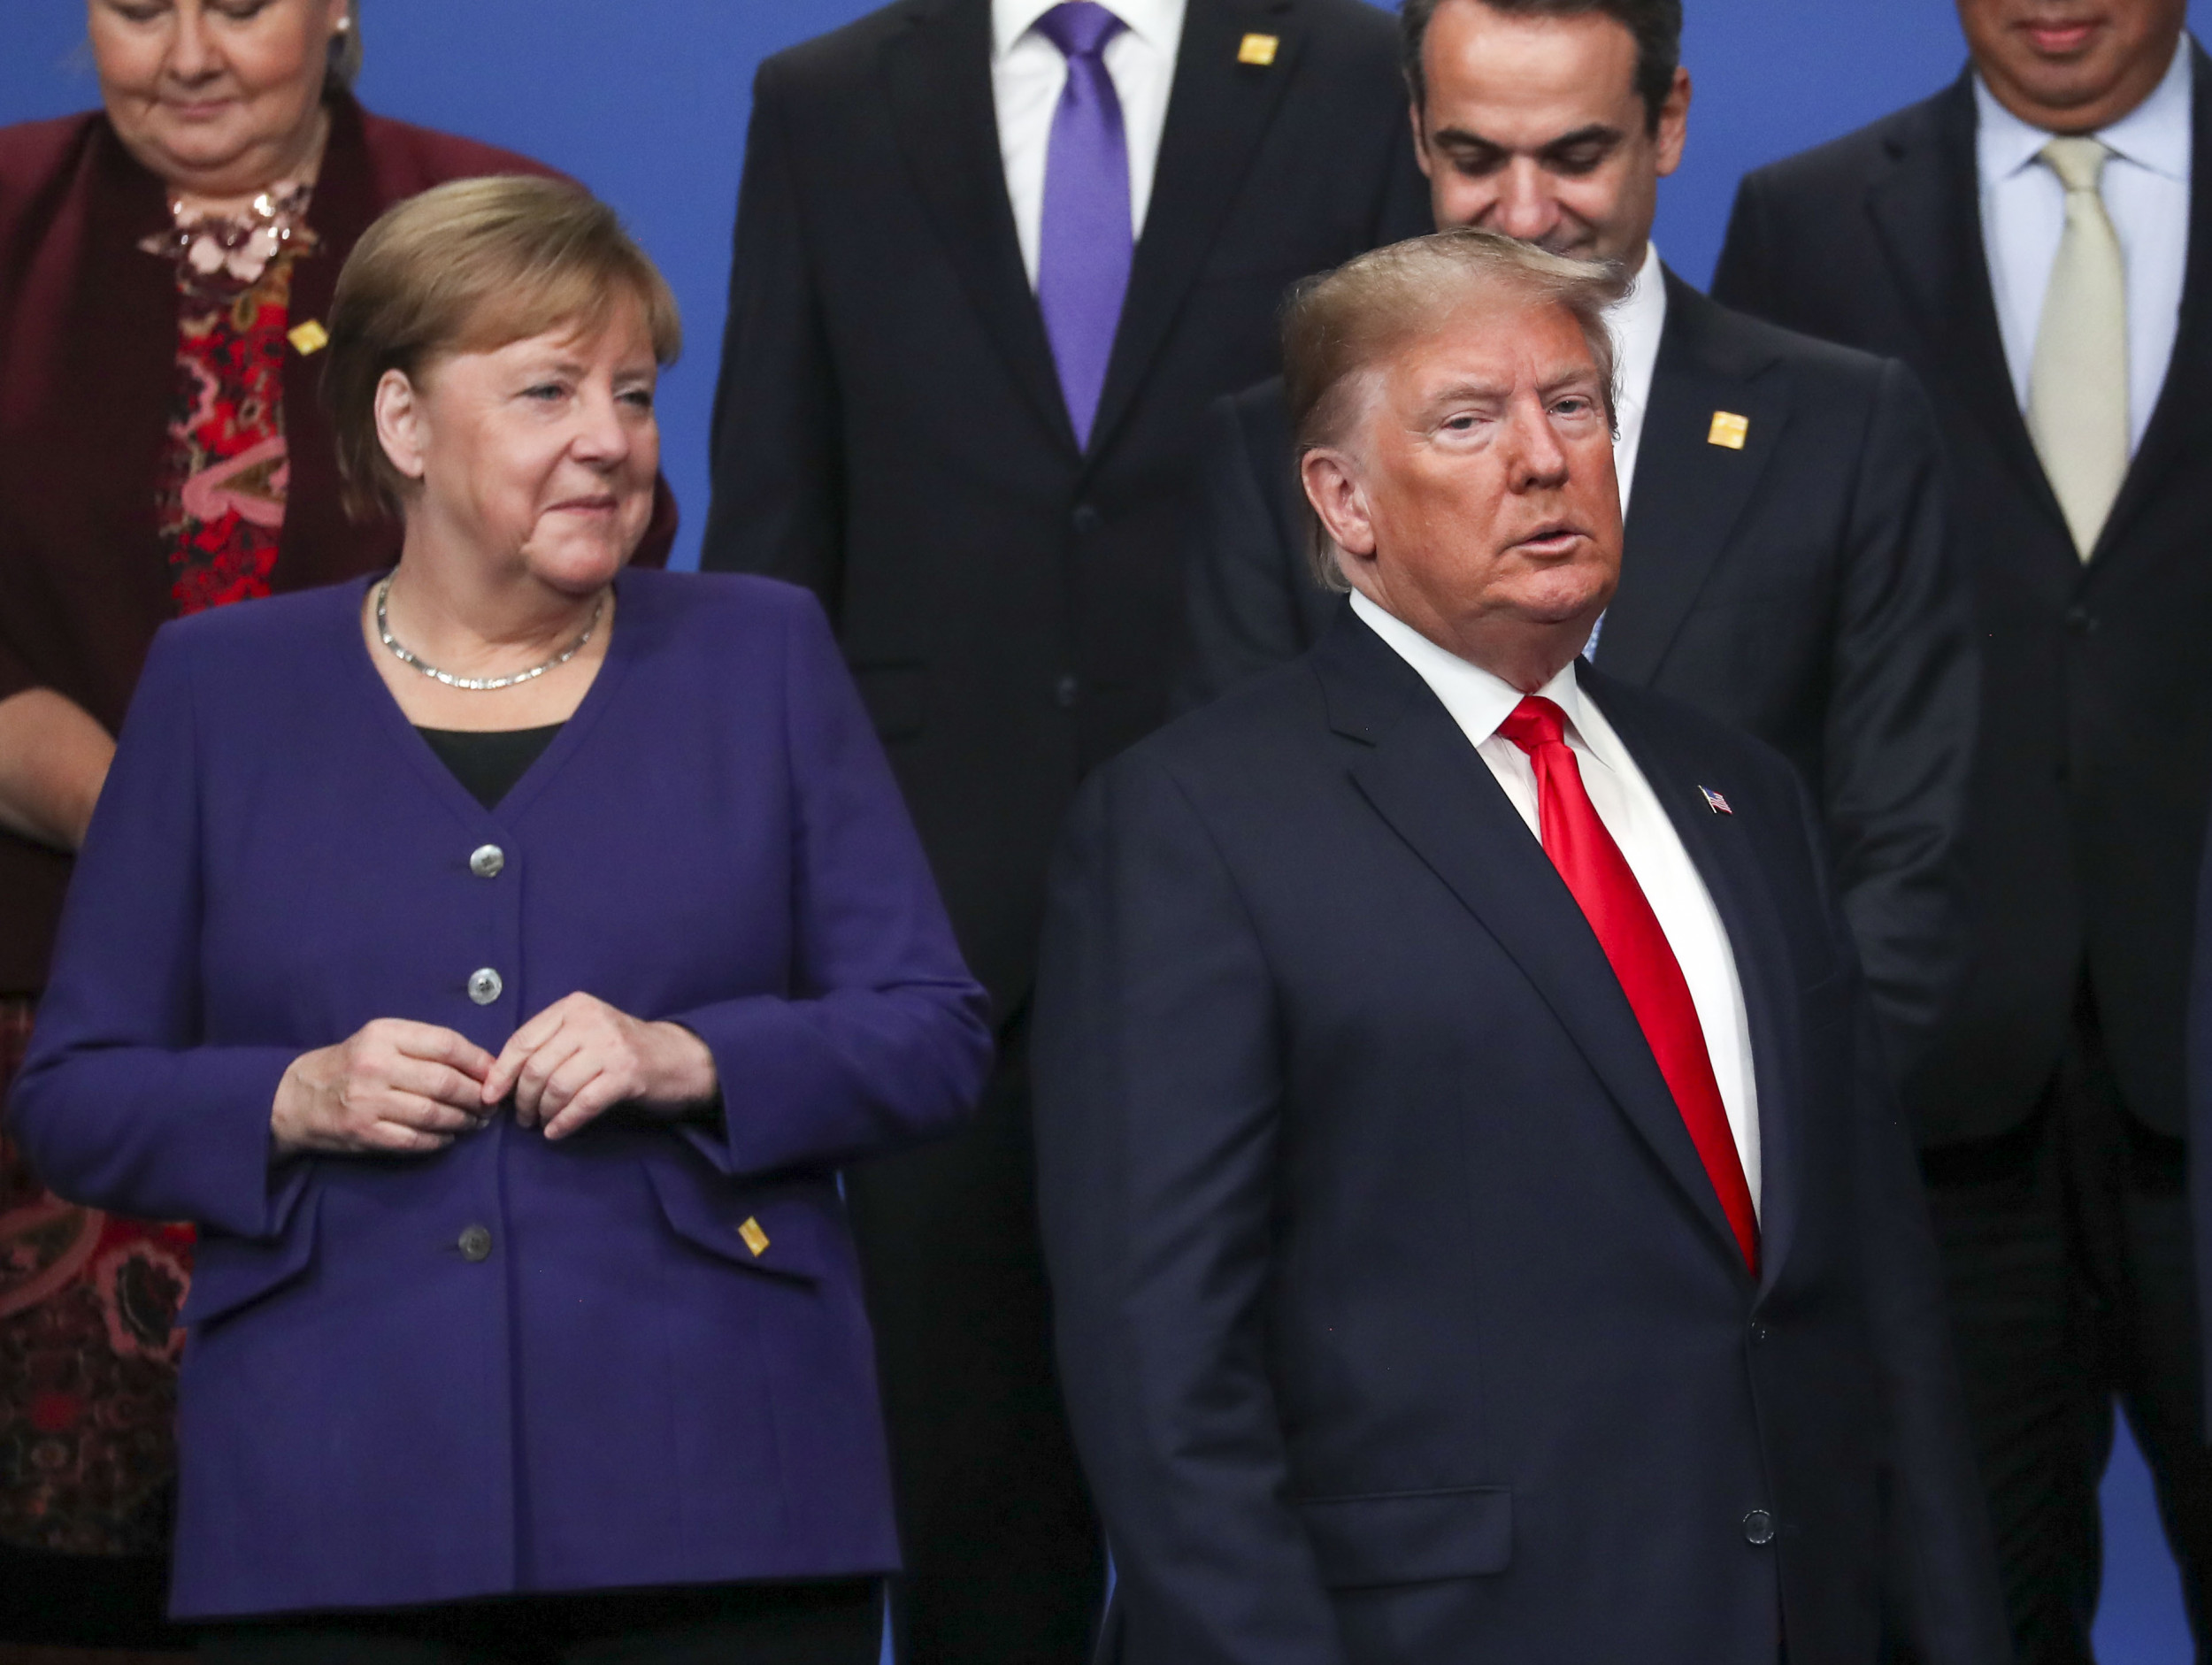 Fox News reports German poll showing Trump as 'greatest threat to